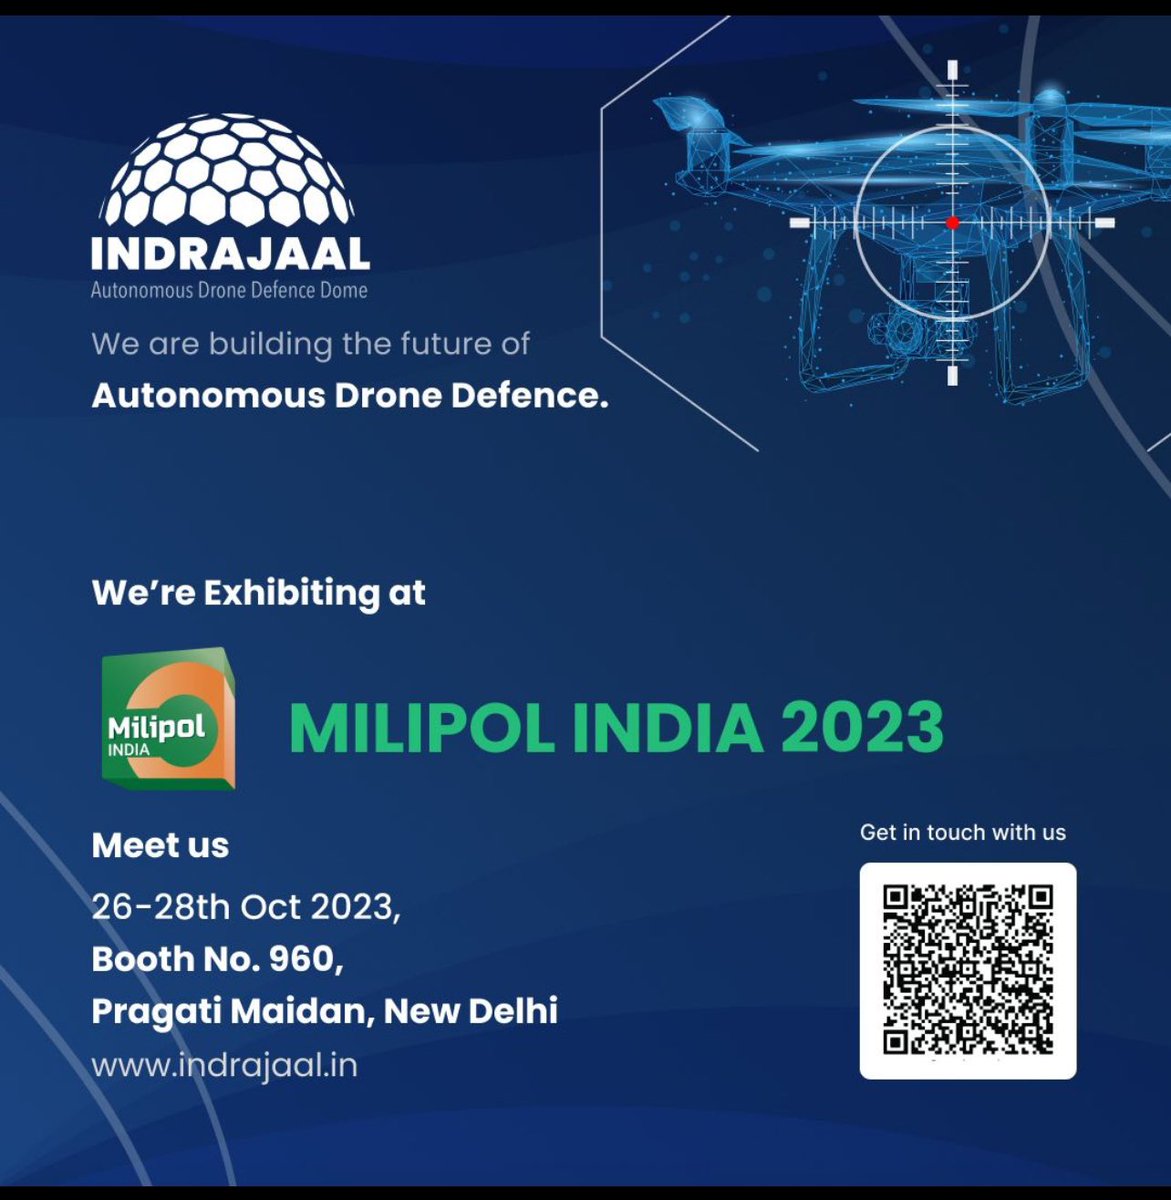 Join us at @milipolindia 

Connect with us to book a slot: lnkd.in/dbfN398A

#Indrajaal #AutonomousDefence #Milipol #MilipolIndia #InternalSecurity #Security #DroneAttacks #UAS #CounterUAS #AutonomousSecurity #FutureOfDefence #SafeguardingTheSkies #IndoPacific